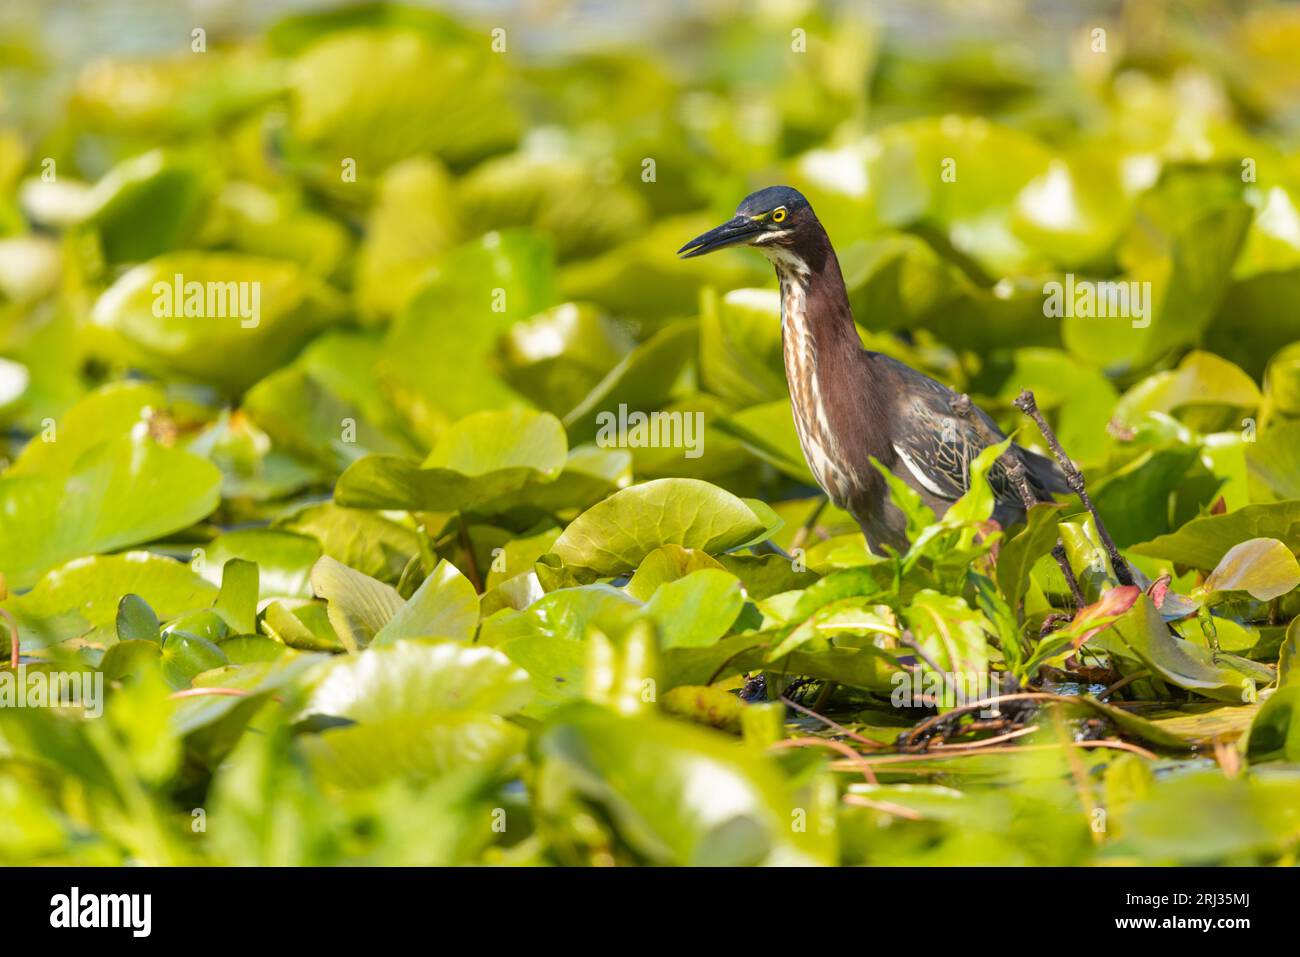 Green heron Butorides virescens, adult foraging amongst floating vegetation, Cape May Bird Observatory, New Jersey, USA, May Stock Photo